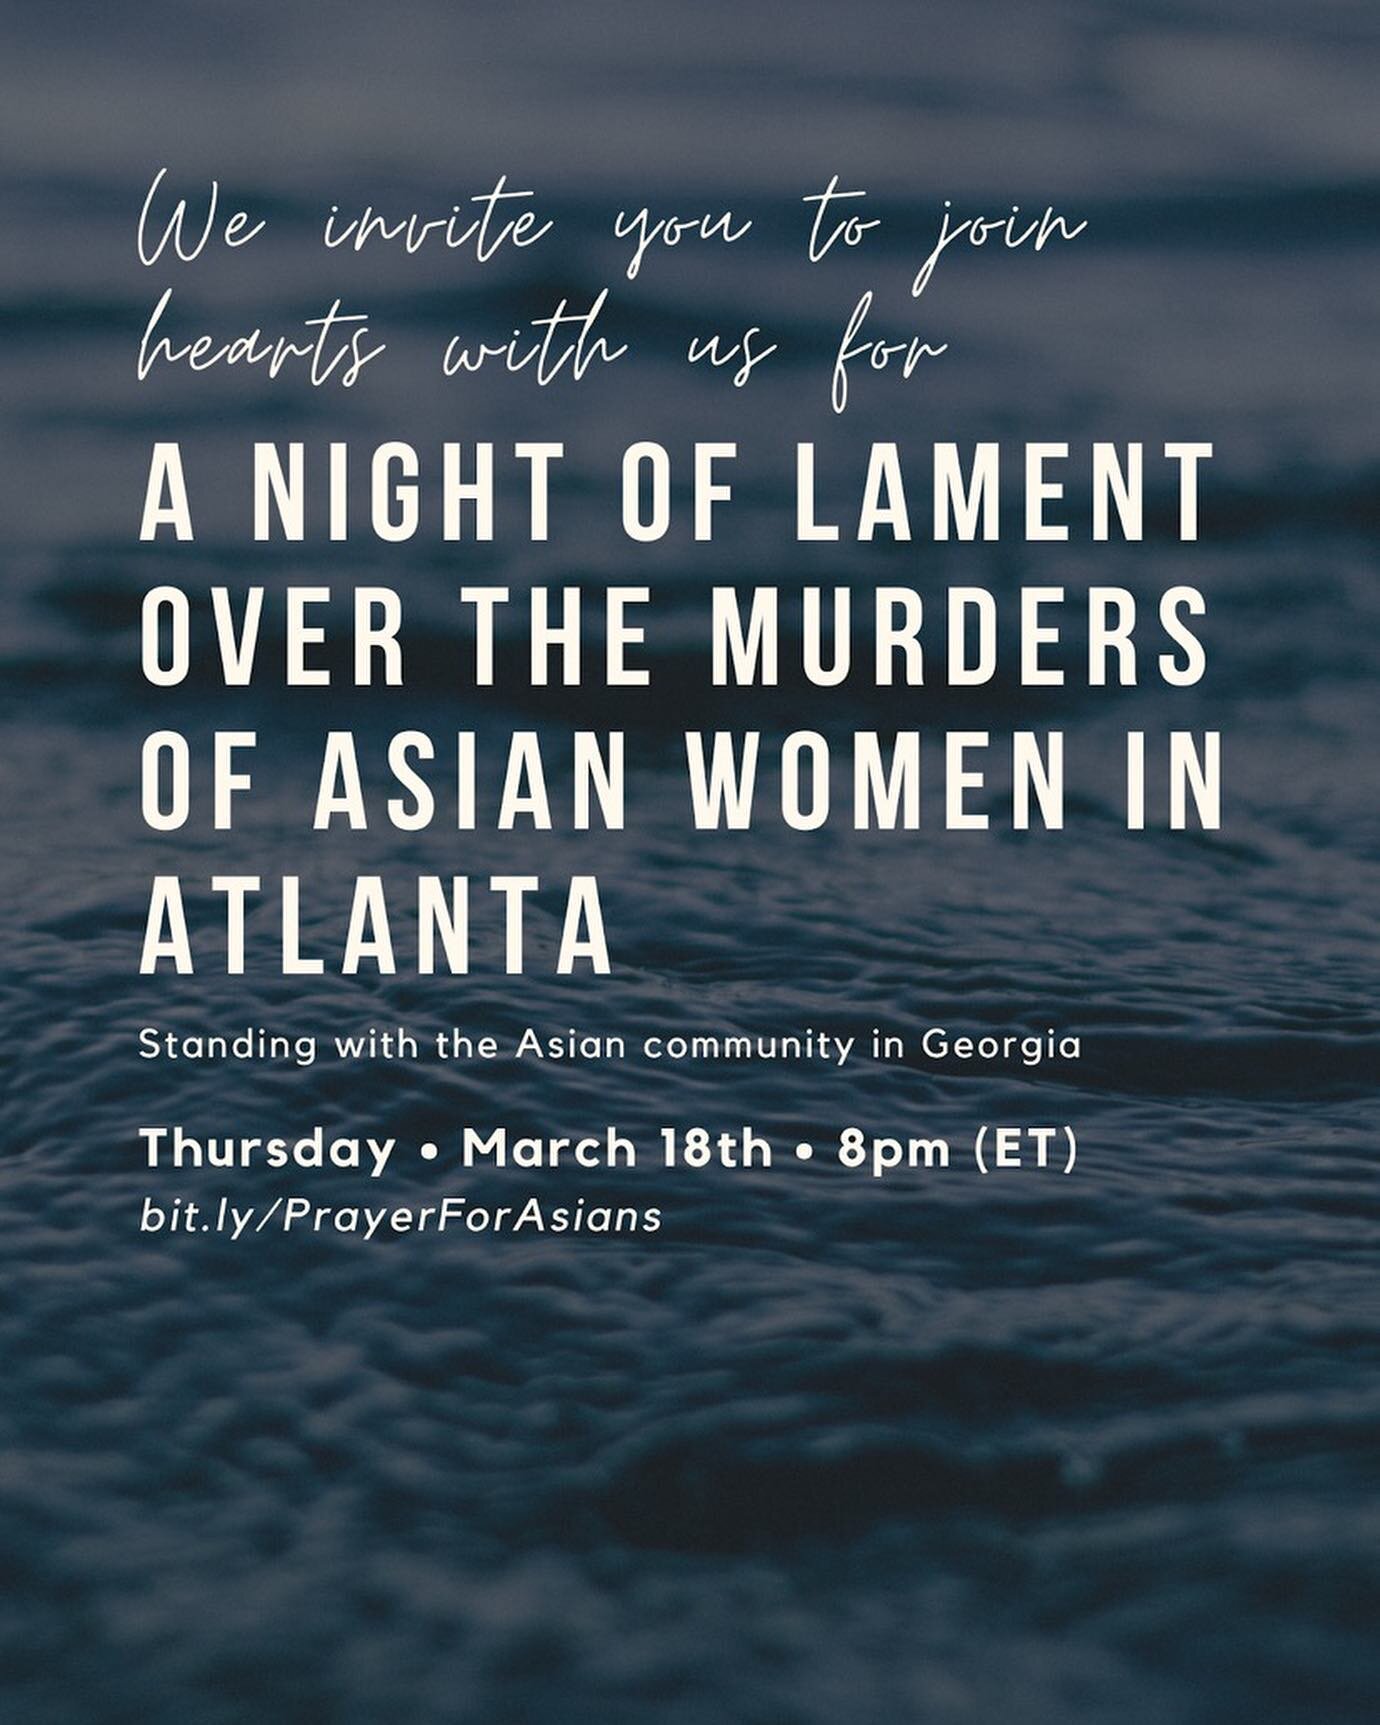 Tonight at 8pm ET, NYU ministries and college students across NYC, from different churches and campus ministries will gather to lament together the violence against Asian women and the Asian community in Atlanta. The president of the Korean American 